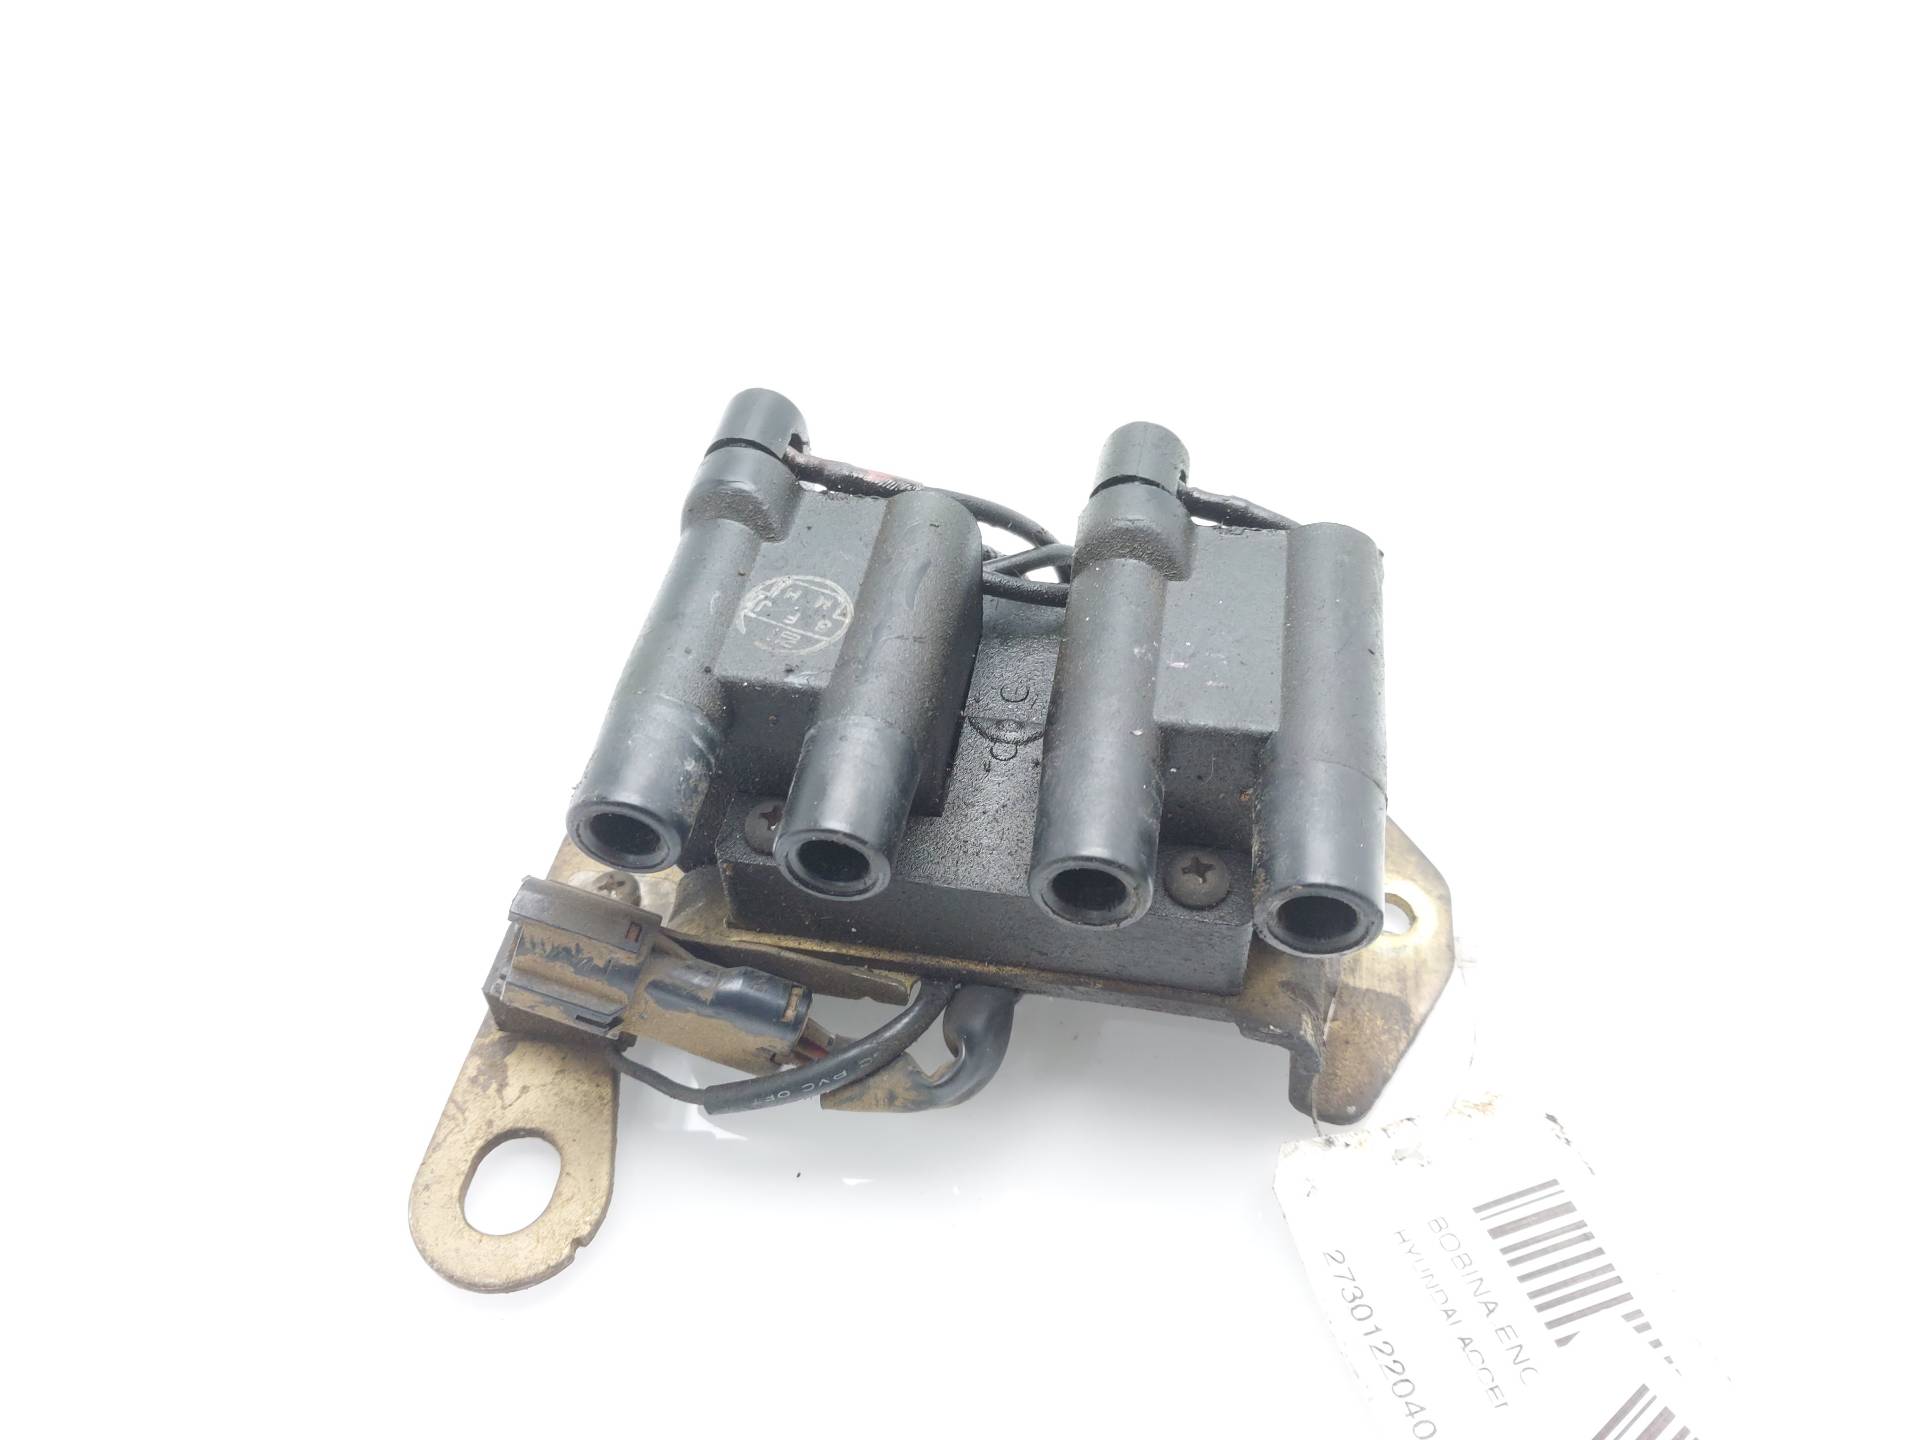 HYUNDAI Accent X3 (1994-2000) High Voltage Ignition Coil 2730122040 25005401